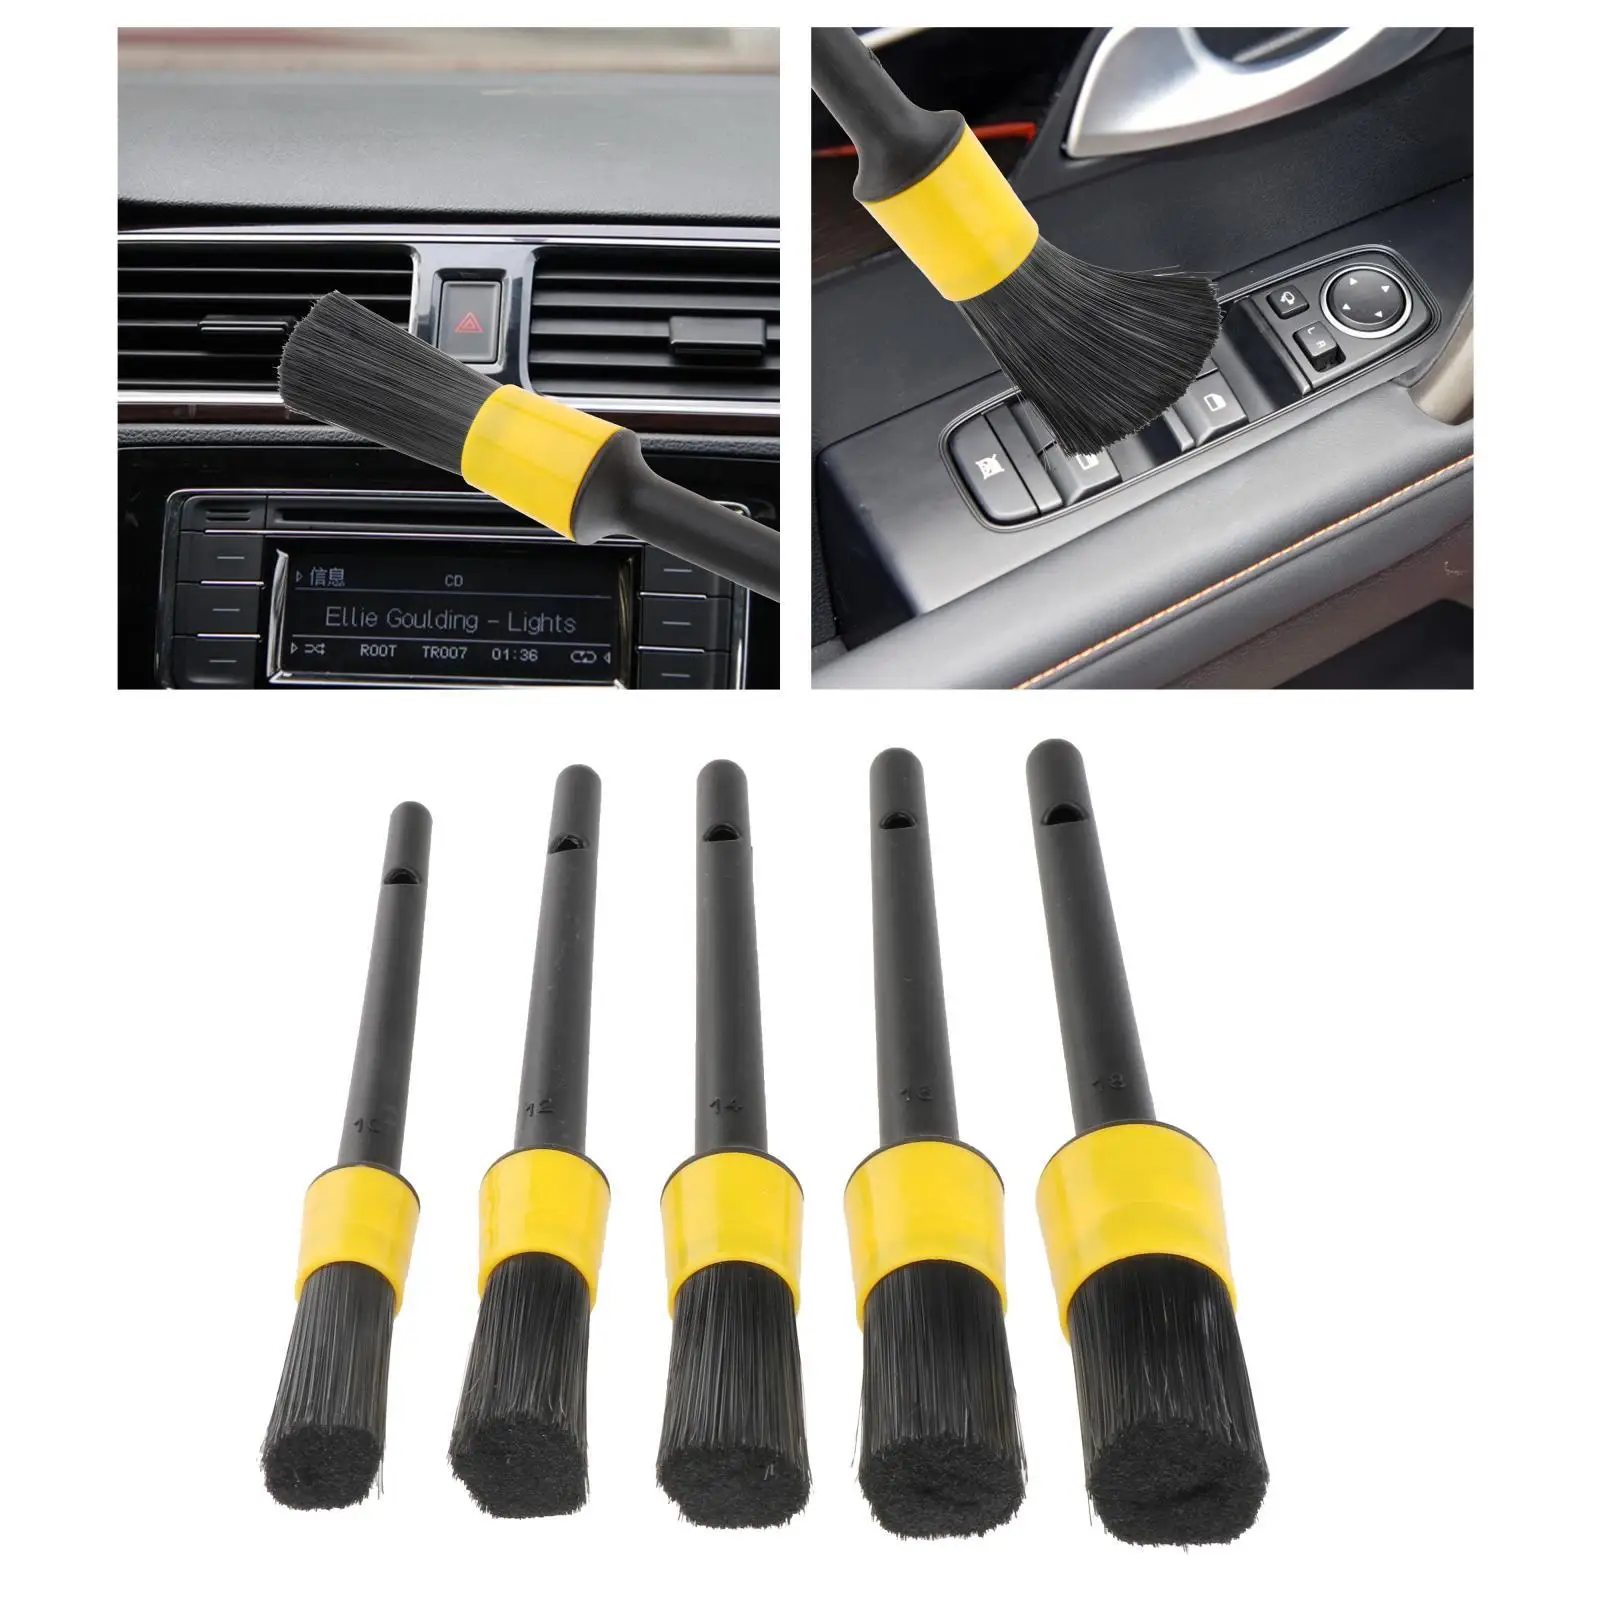 5 Pieces Auto Car Detailing Brush Set for Cleaning Interior Air Vent